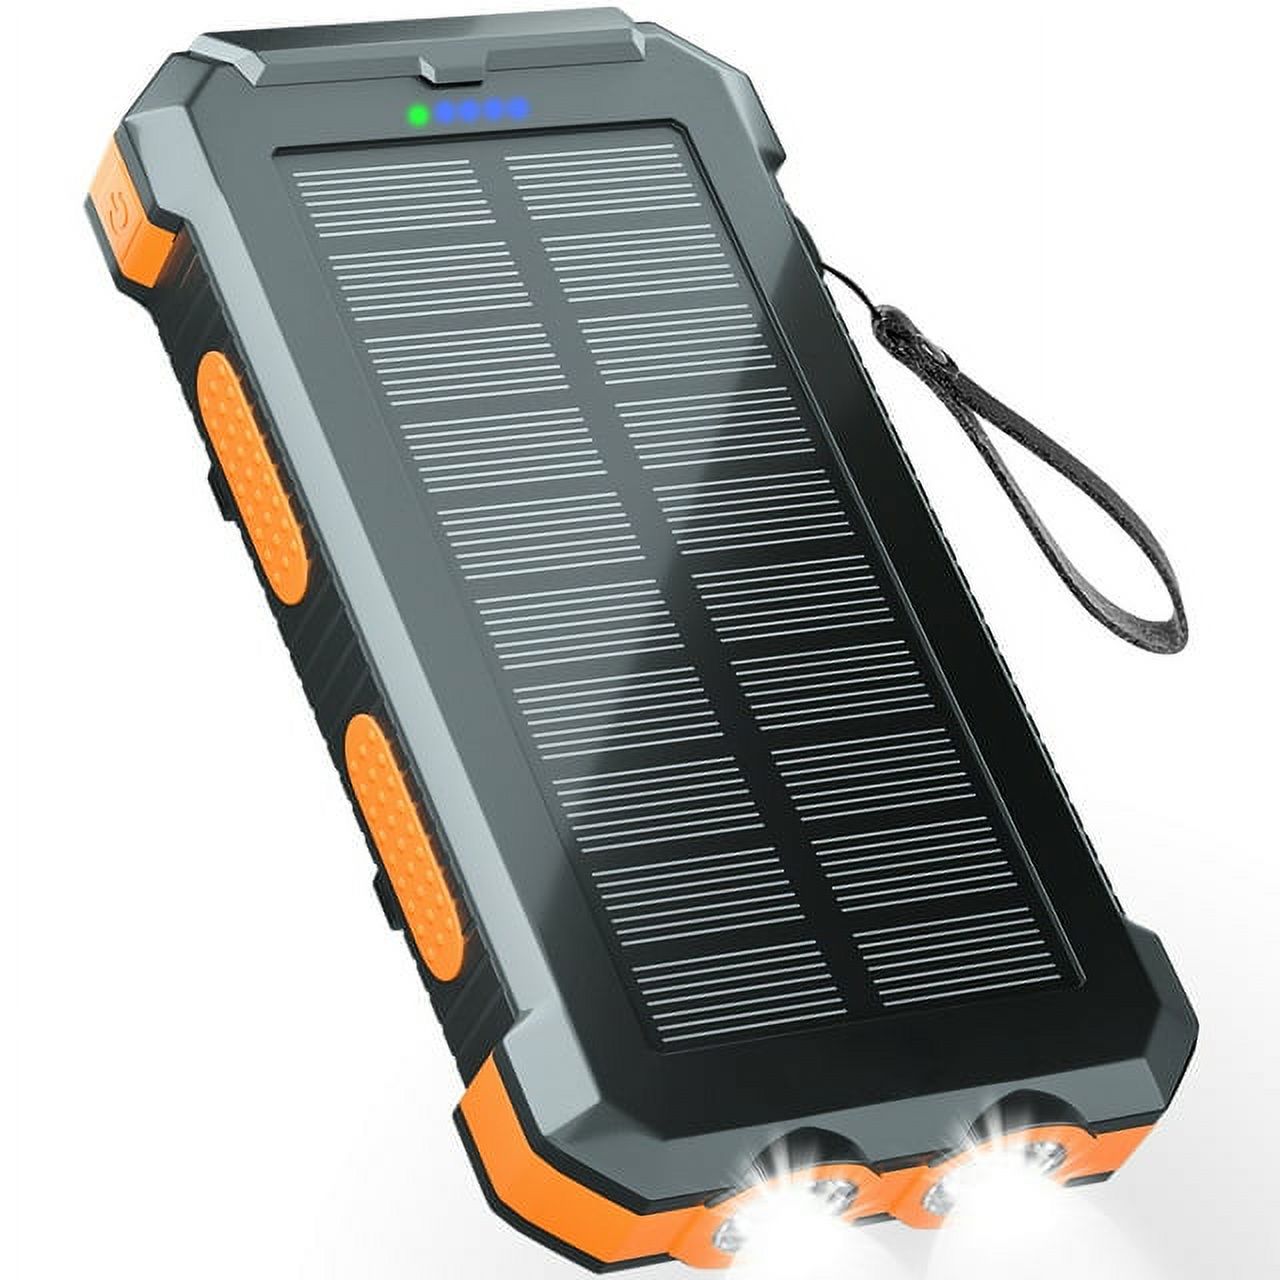 SOLPOWBEN 30000mAh Solar Charger for Cell Phone iPhone, Portable Solar Power Bank with Dual 5V USB Ports, 2 Led Light Flashlight, Compass Battery Pack for Outdoor Camping Hiking (Orange) - image 1 of 8